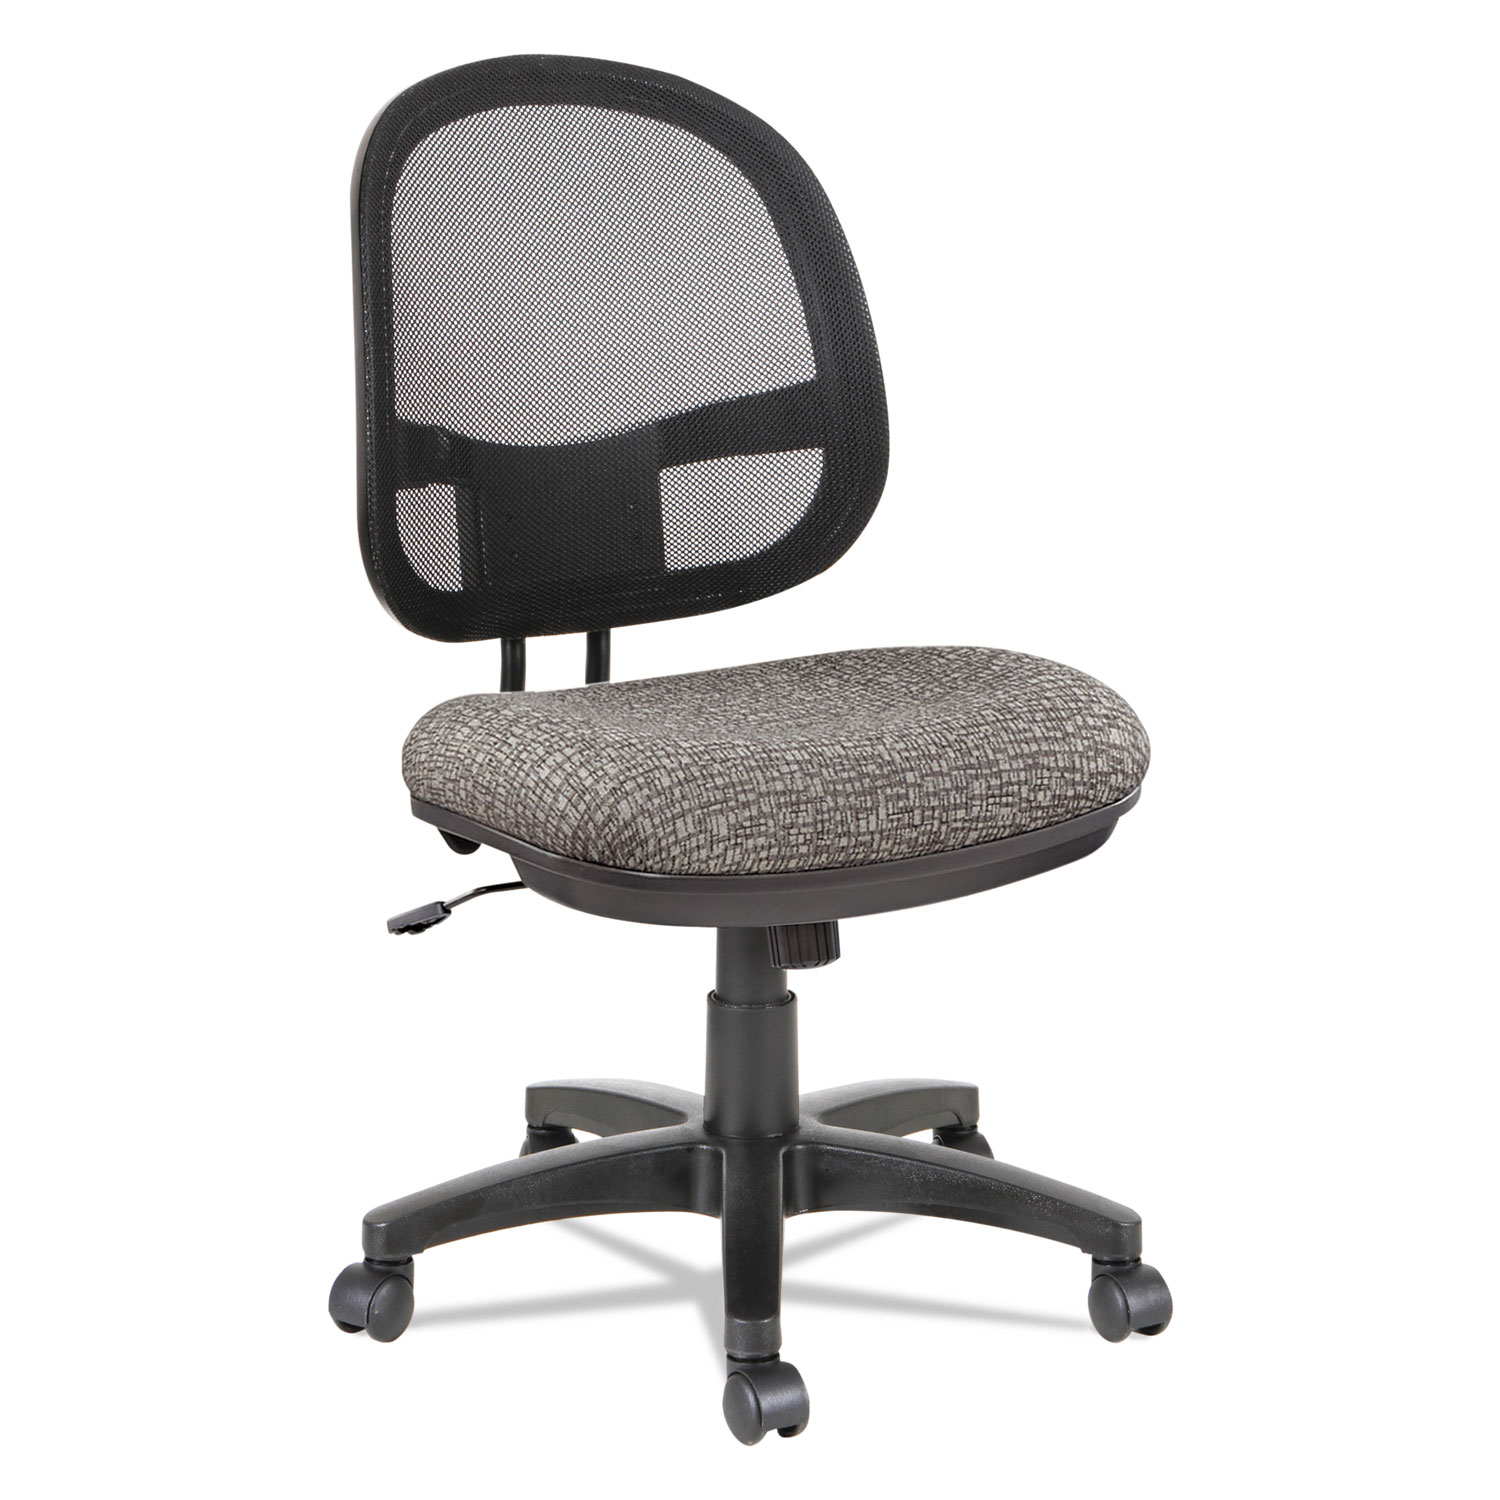 Alera Interval Series Swivel/Tilt Mesh Chair, Supports up to 275 lbs., Graphite Gray Seat/Graphite Gray Back, Black Base